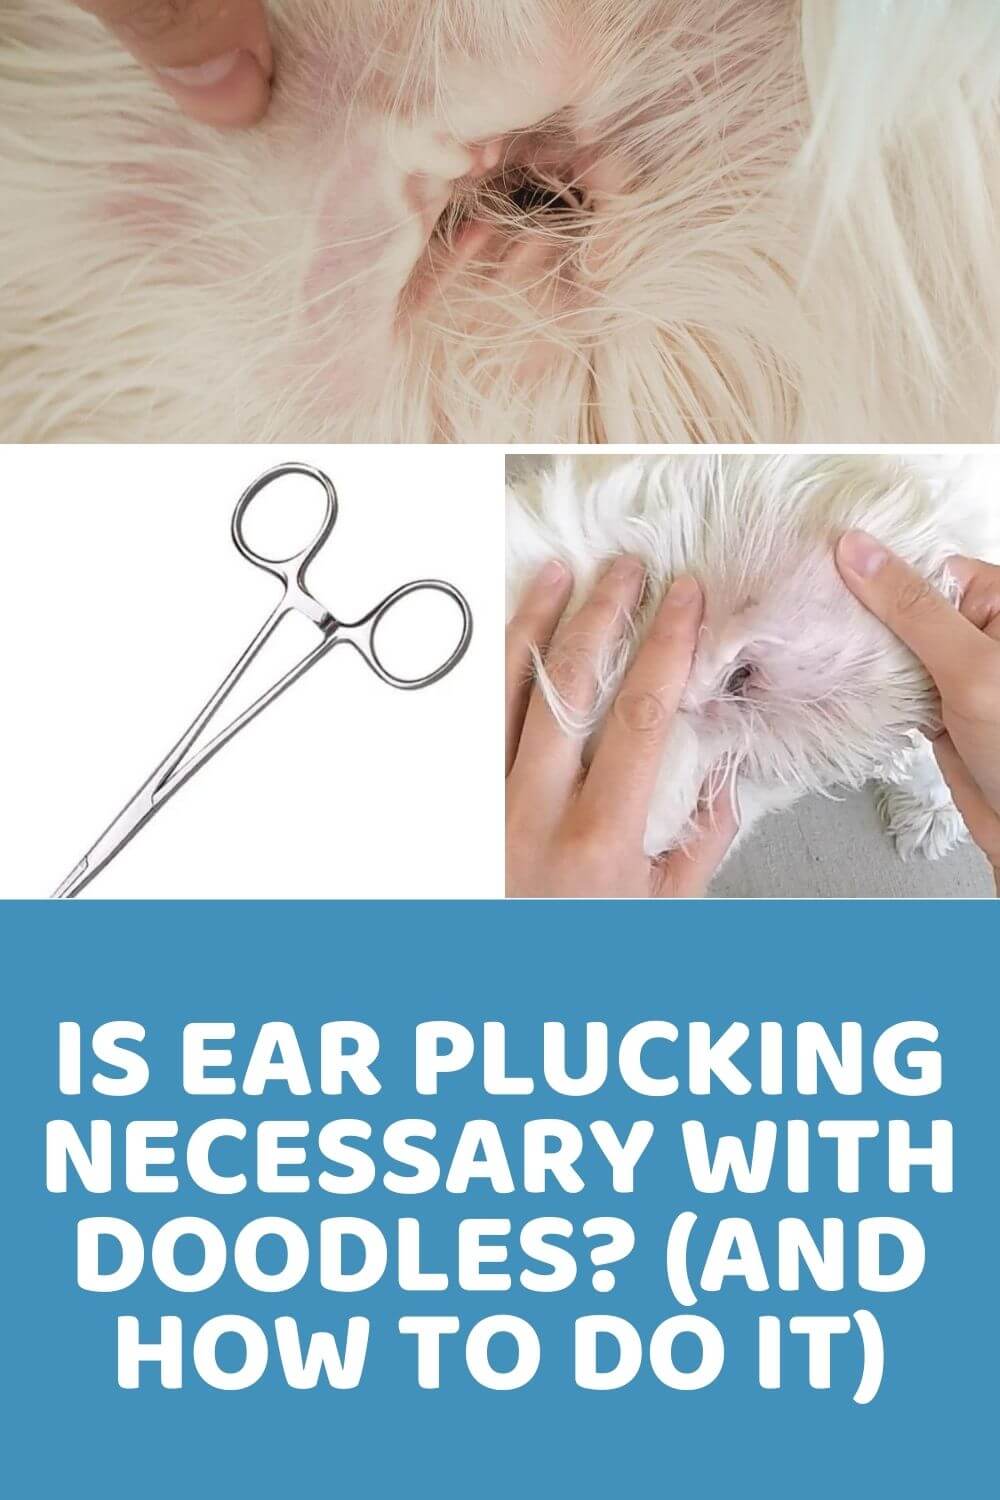 Is Dog Ear Plucking Necessary With Doodles? + Ear Plucking Tutorial